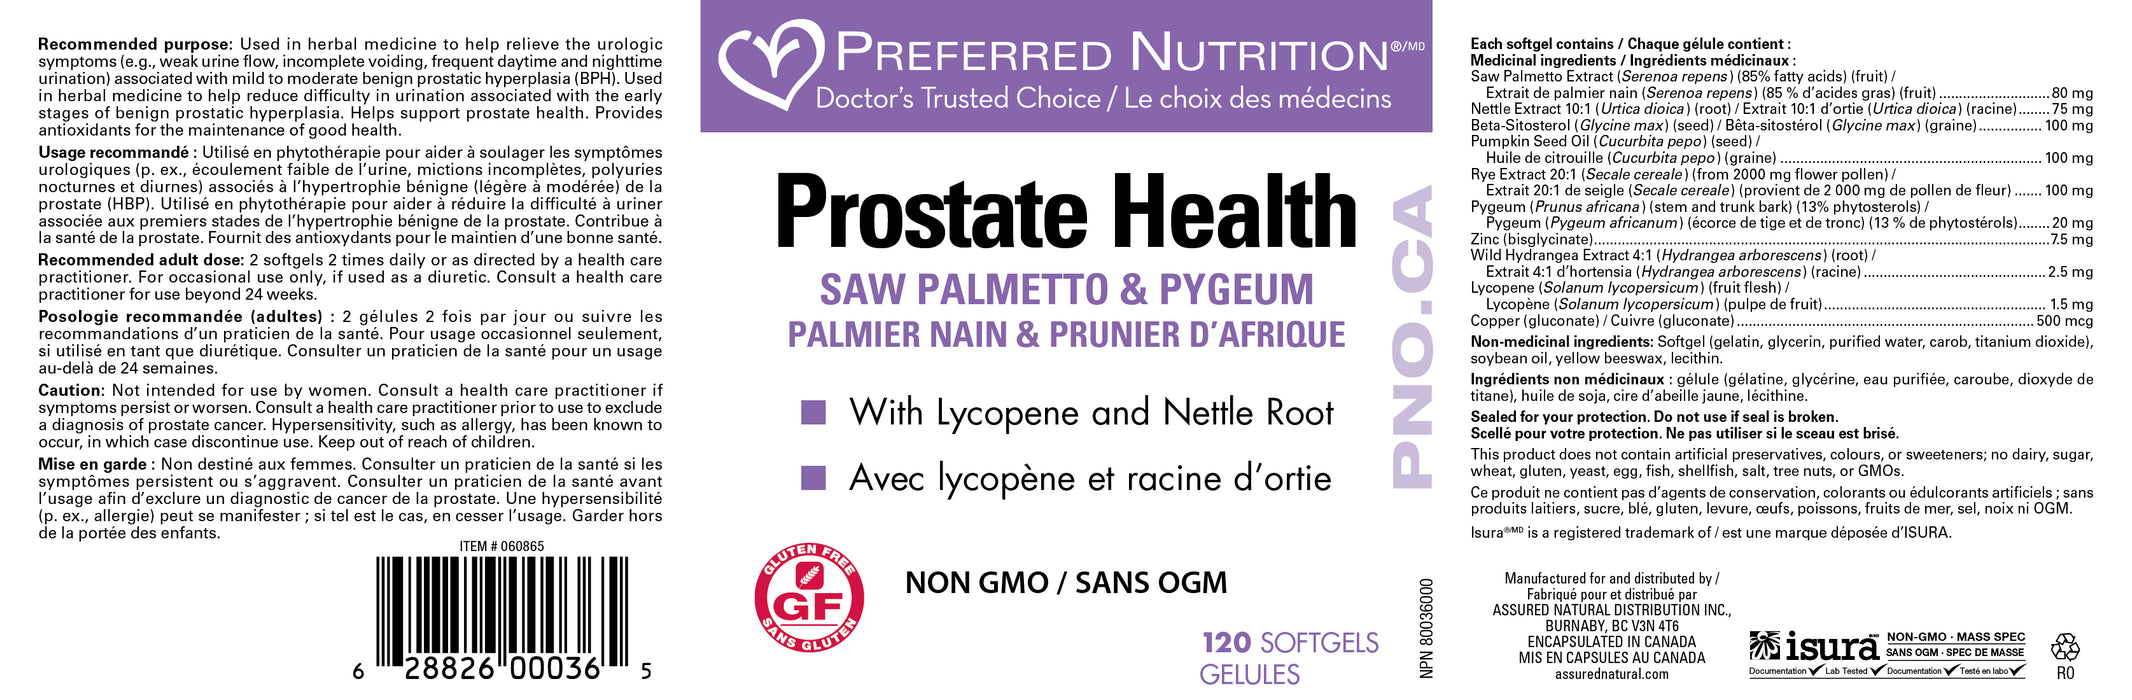 Preferred Nutrition Prostate Health Saw Palmetto & Pygeum 120 Softgels